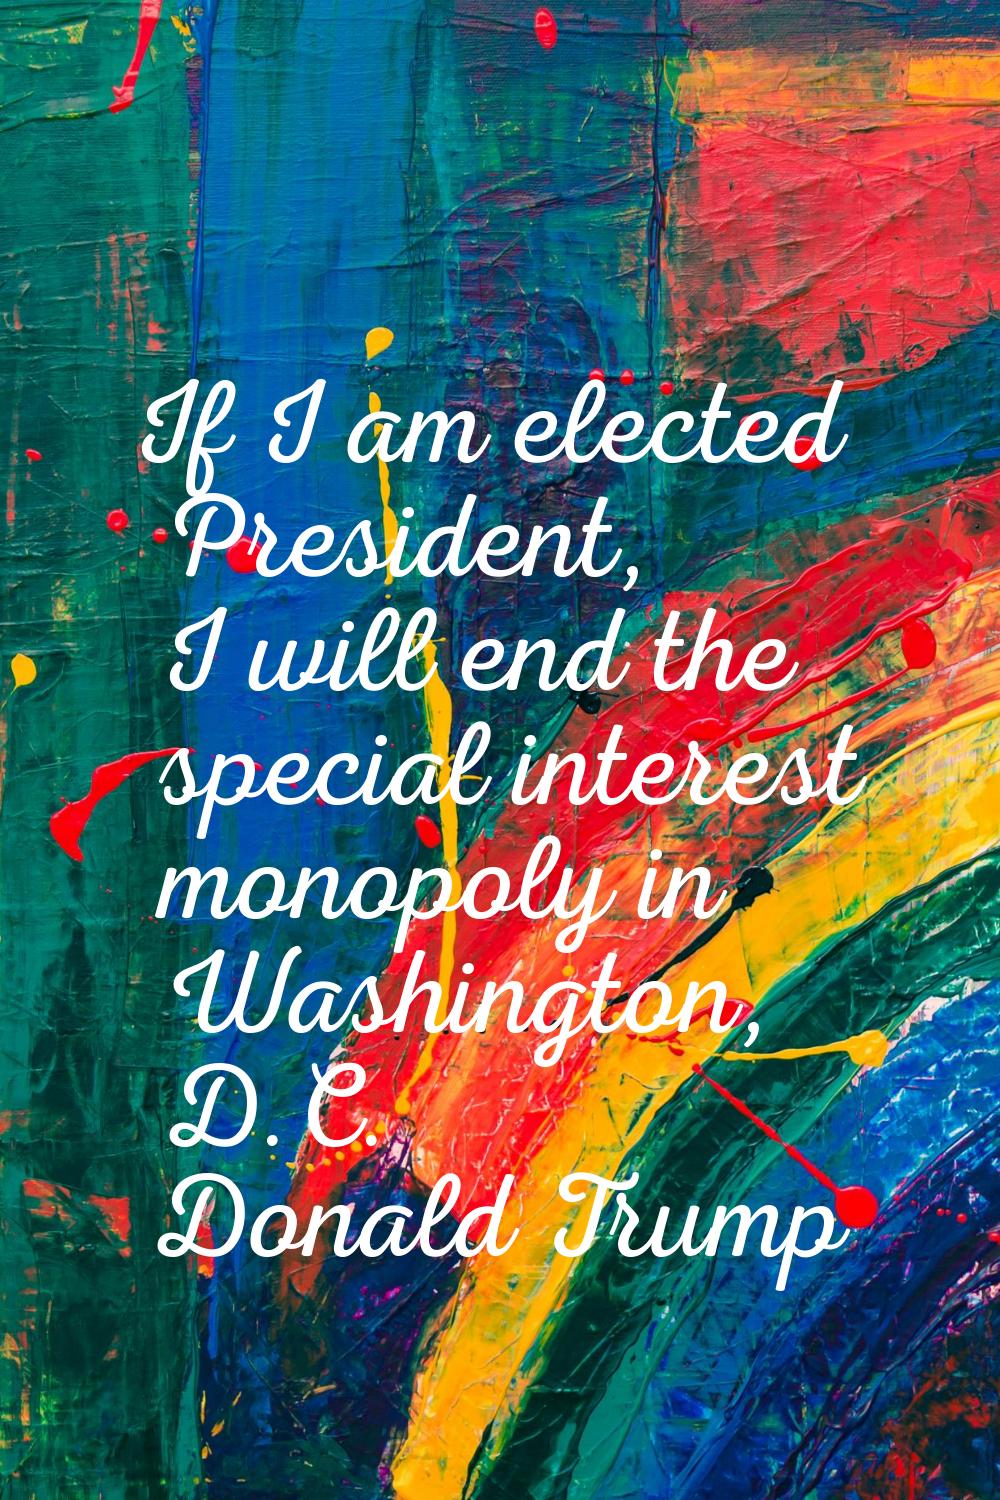 If I am elected President, I will end the special interest monopoly in Washington, D.C.